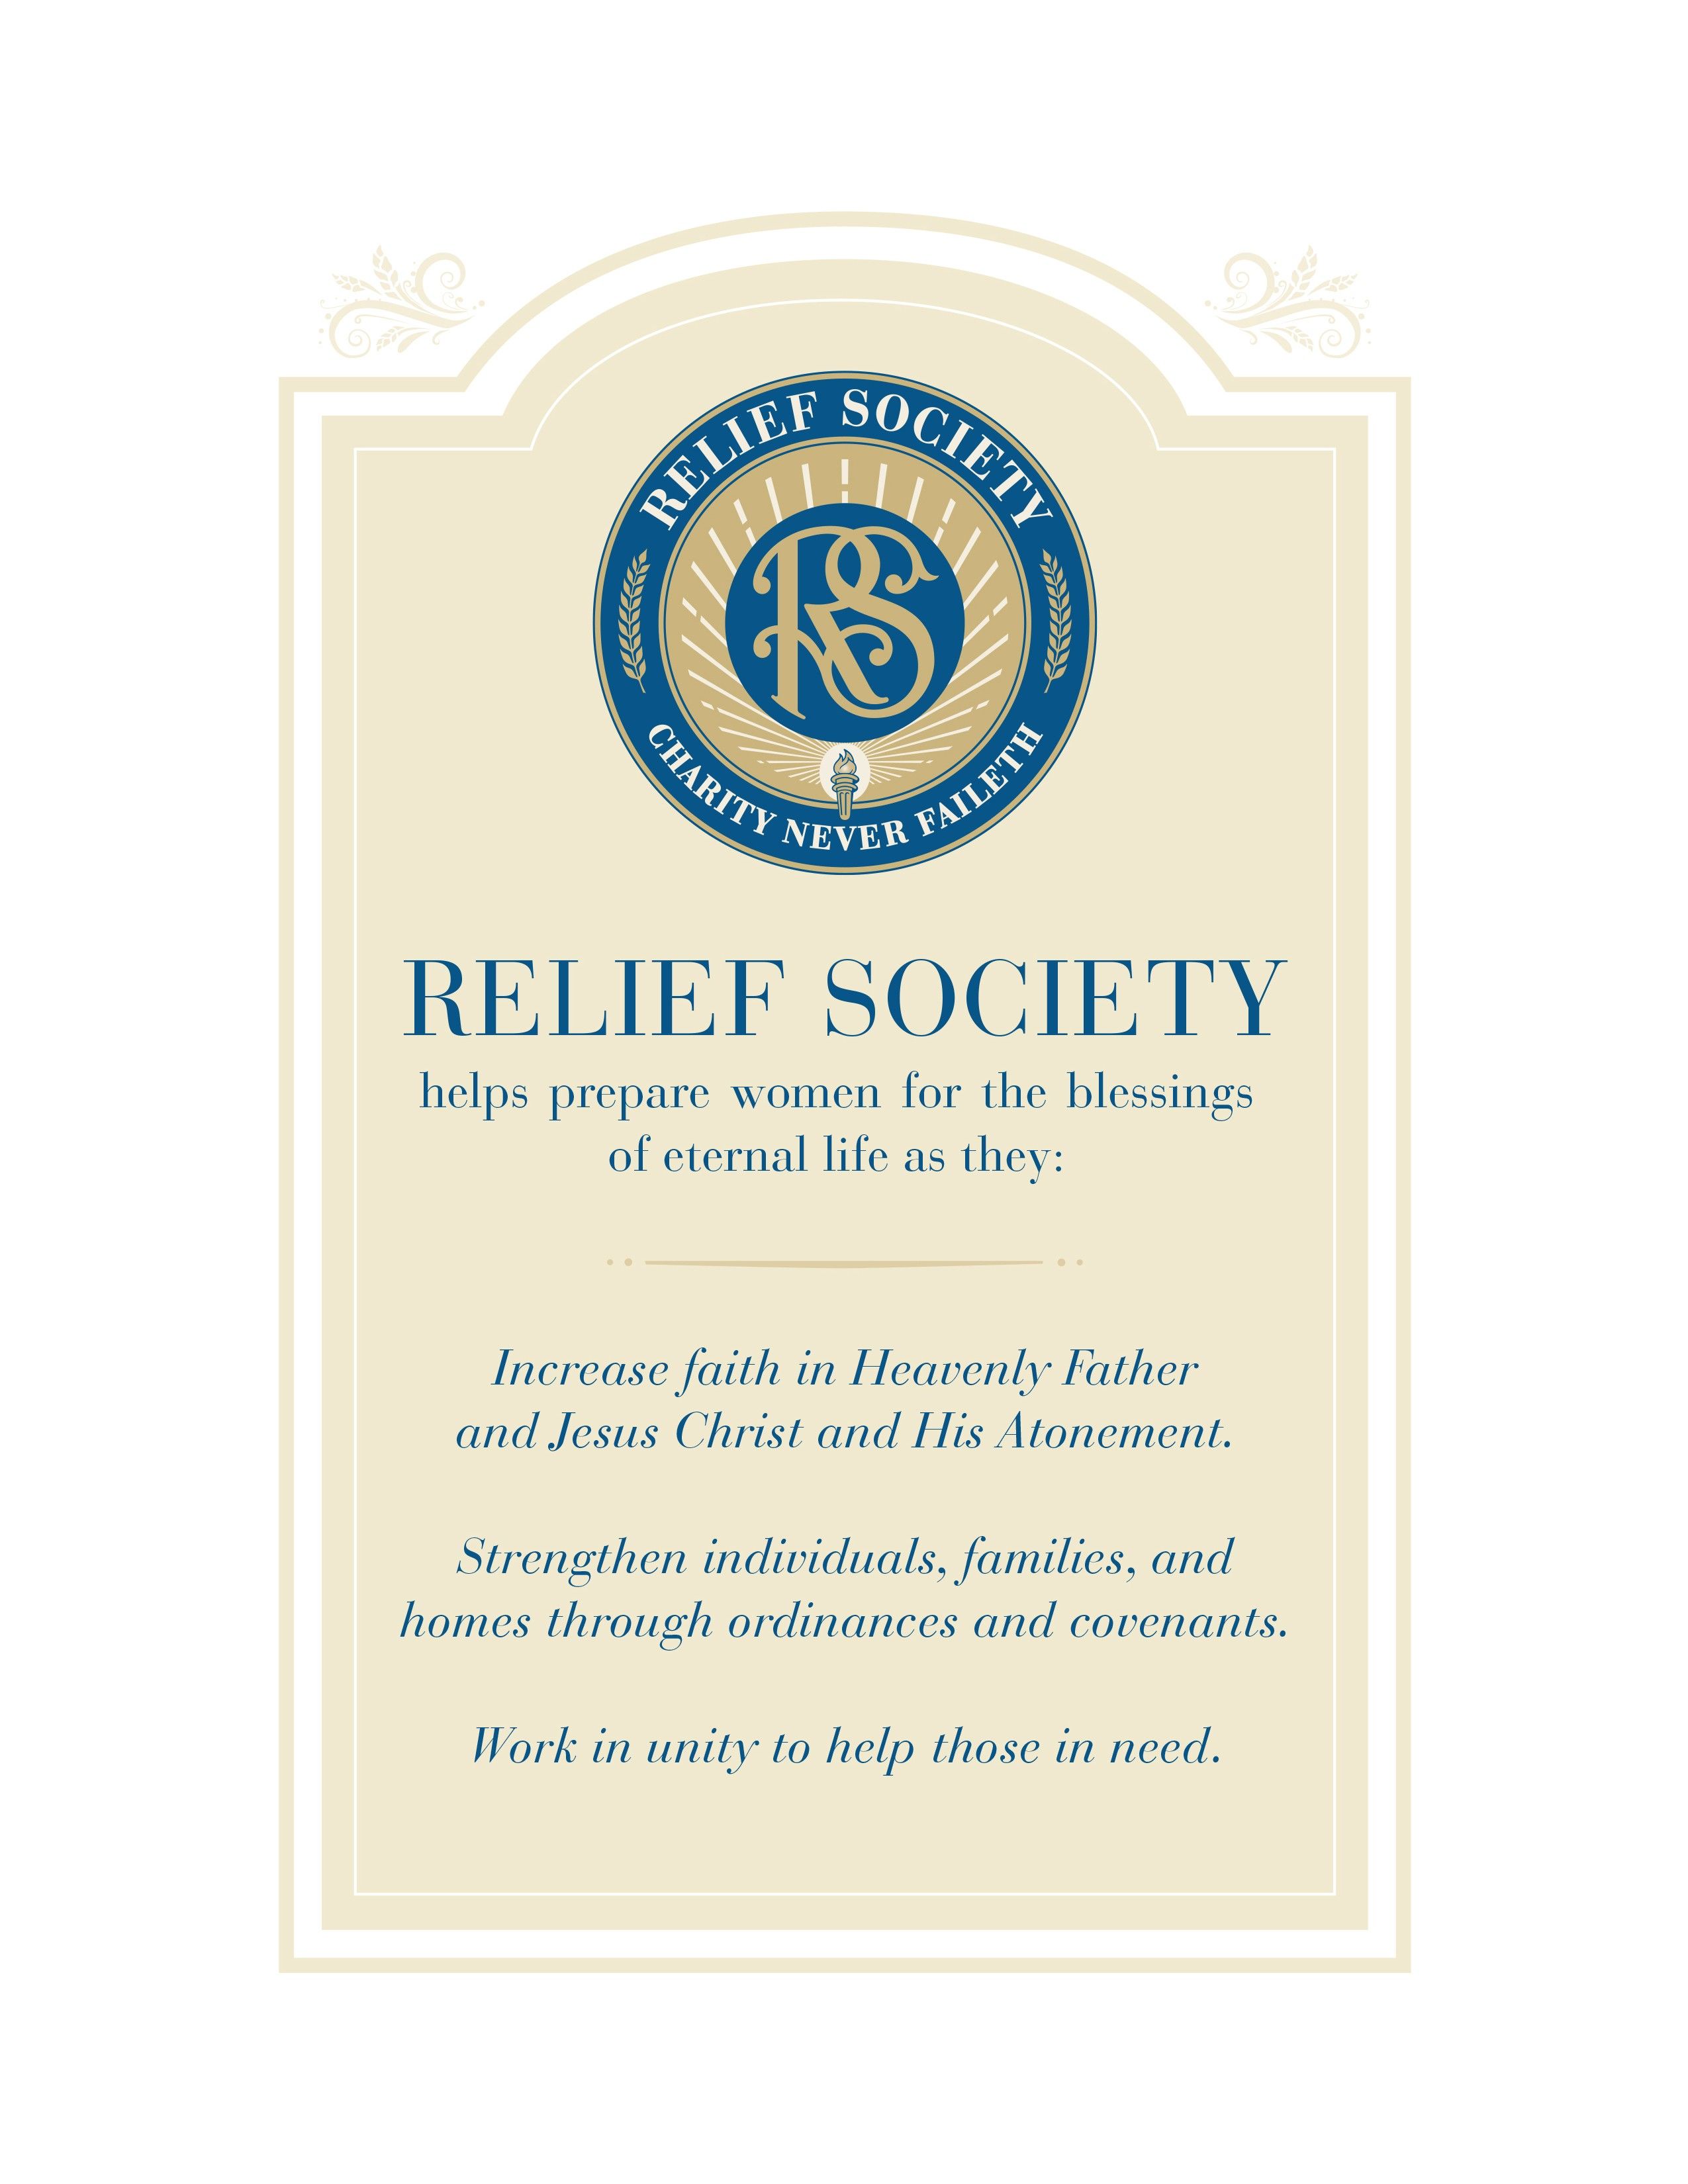 “Relief Society helps prepare women for the blessings of eternal life as they: Increase faith in Heavenly Father and Jesus Christ and His Atonement. Strengthen individuals, families, and homes through ordinances and covenants. Work in unity to help those in need.”